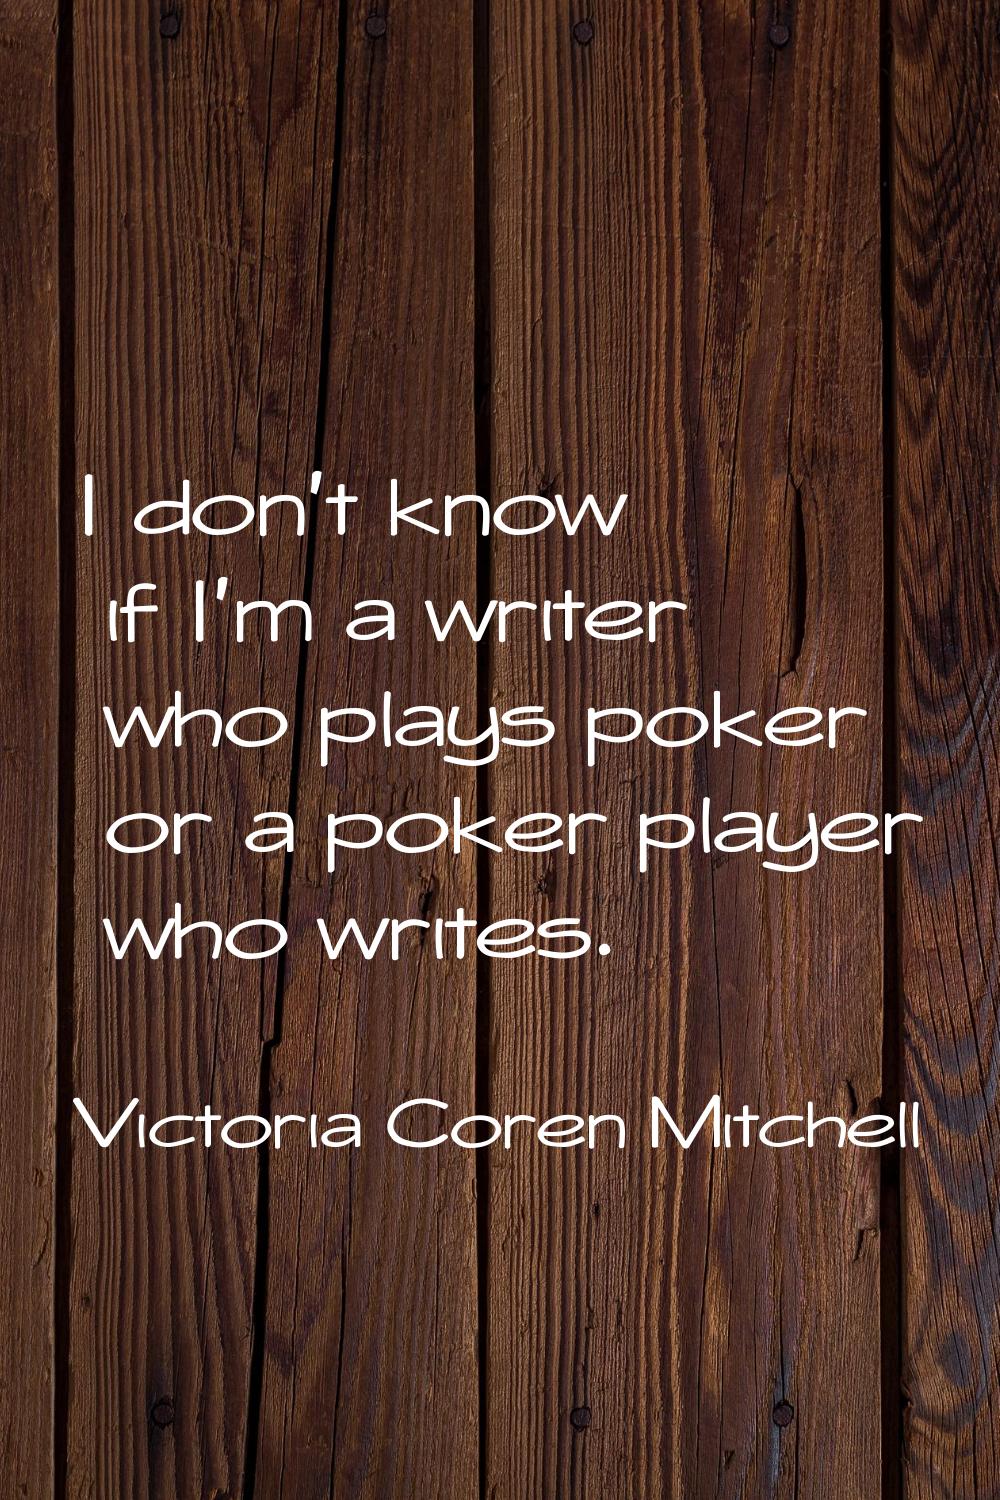 I don't know if I'm a writer who plays poker or a poker player who writes.